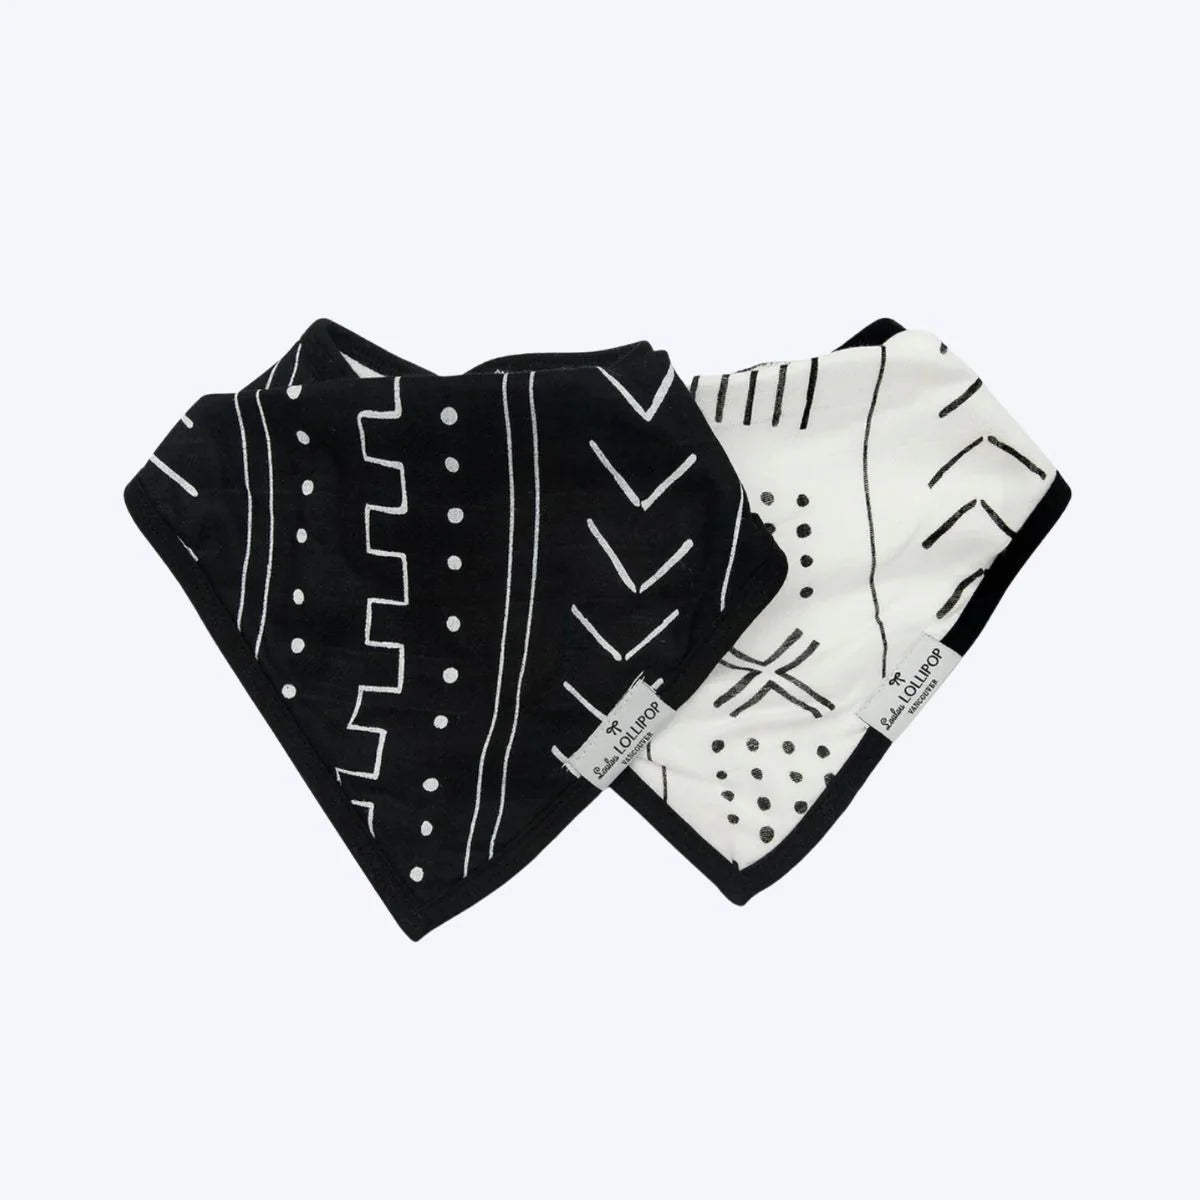 A set of black and white printed bibs by Loulou Lollipop